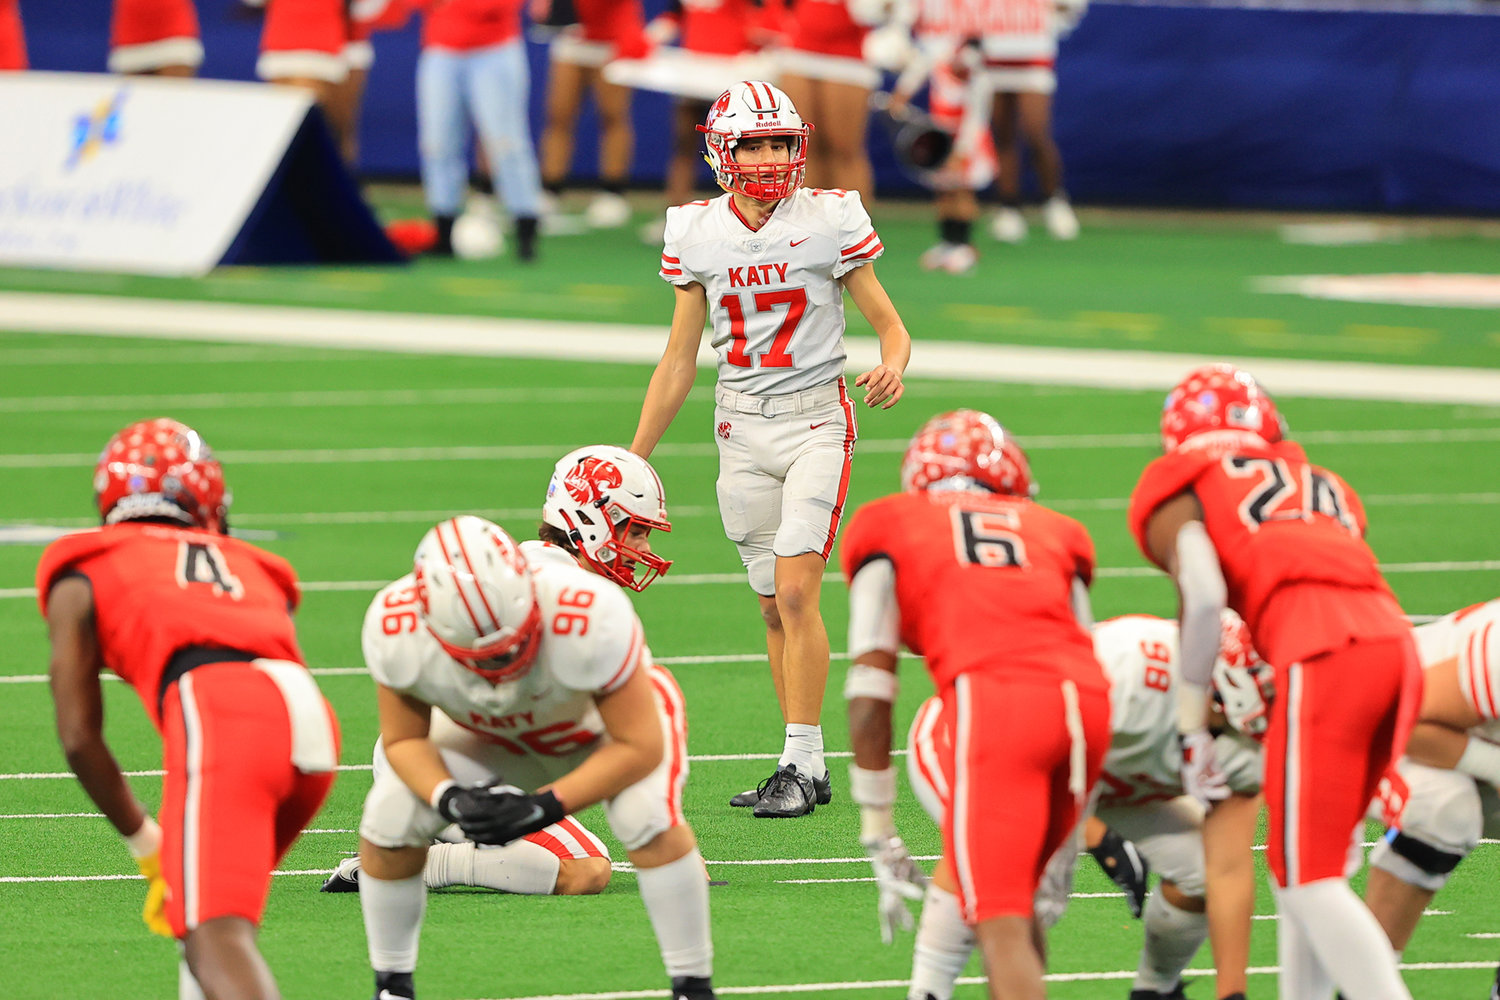 Katy High senior kicker Nemanja Lazic lines up to attempt a 48-yard field goal in the first half of the Tigers’ 51-14 Class 6A-Division II state championship win over Cedar Hill on Saturday, Jan. 16, at AT&T Stadium in Arlington. Lazic made the field goal, tying a UIL state record for longest field goal made.